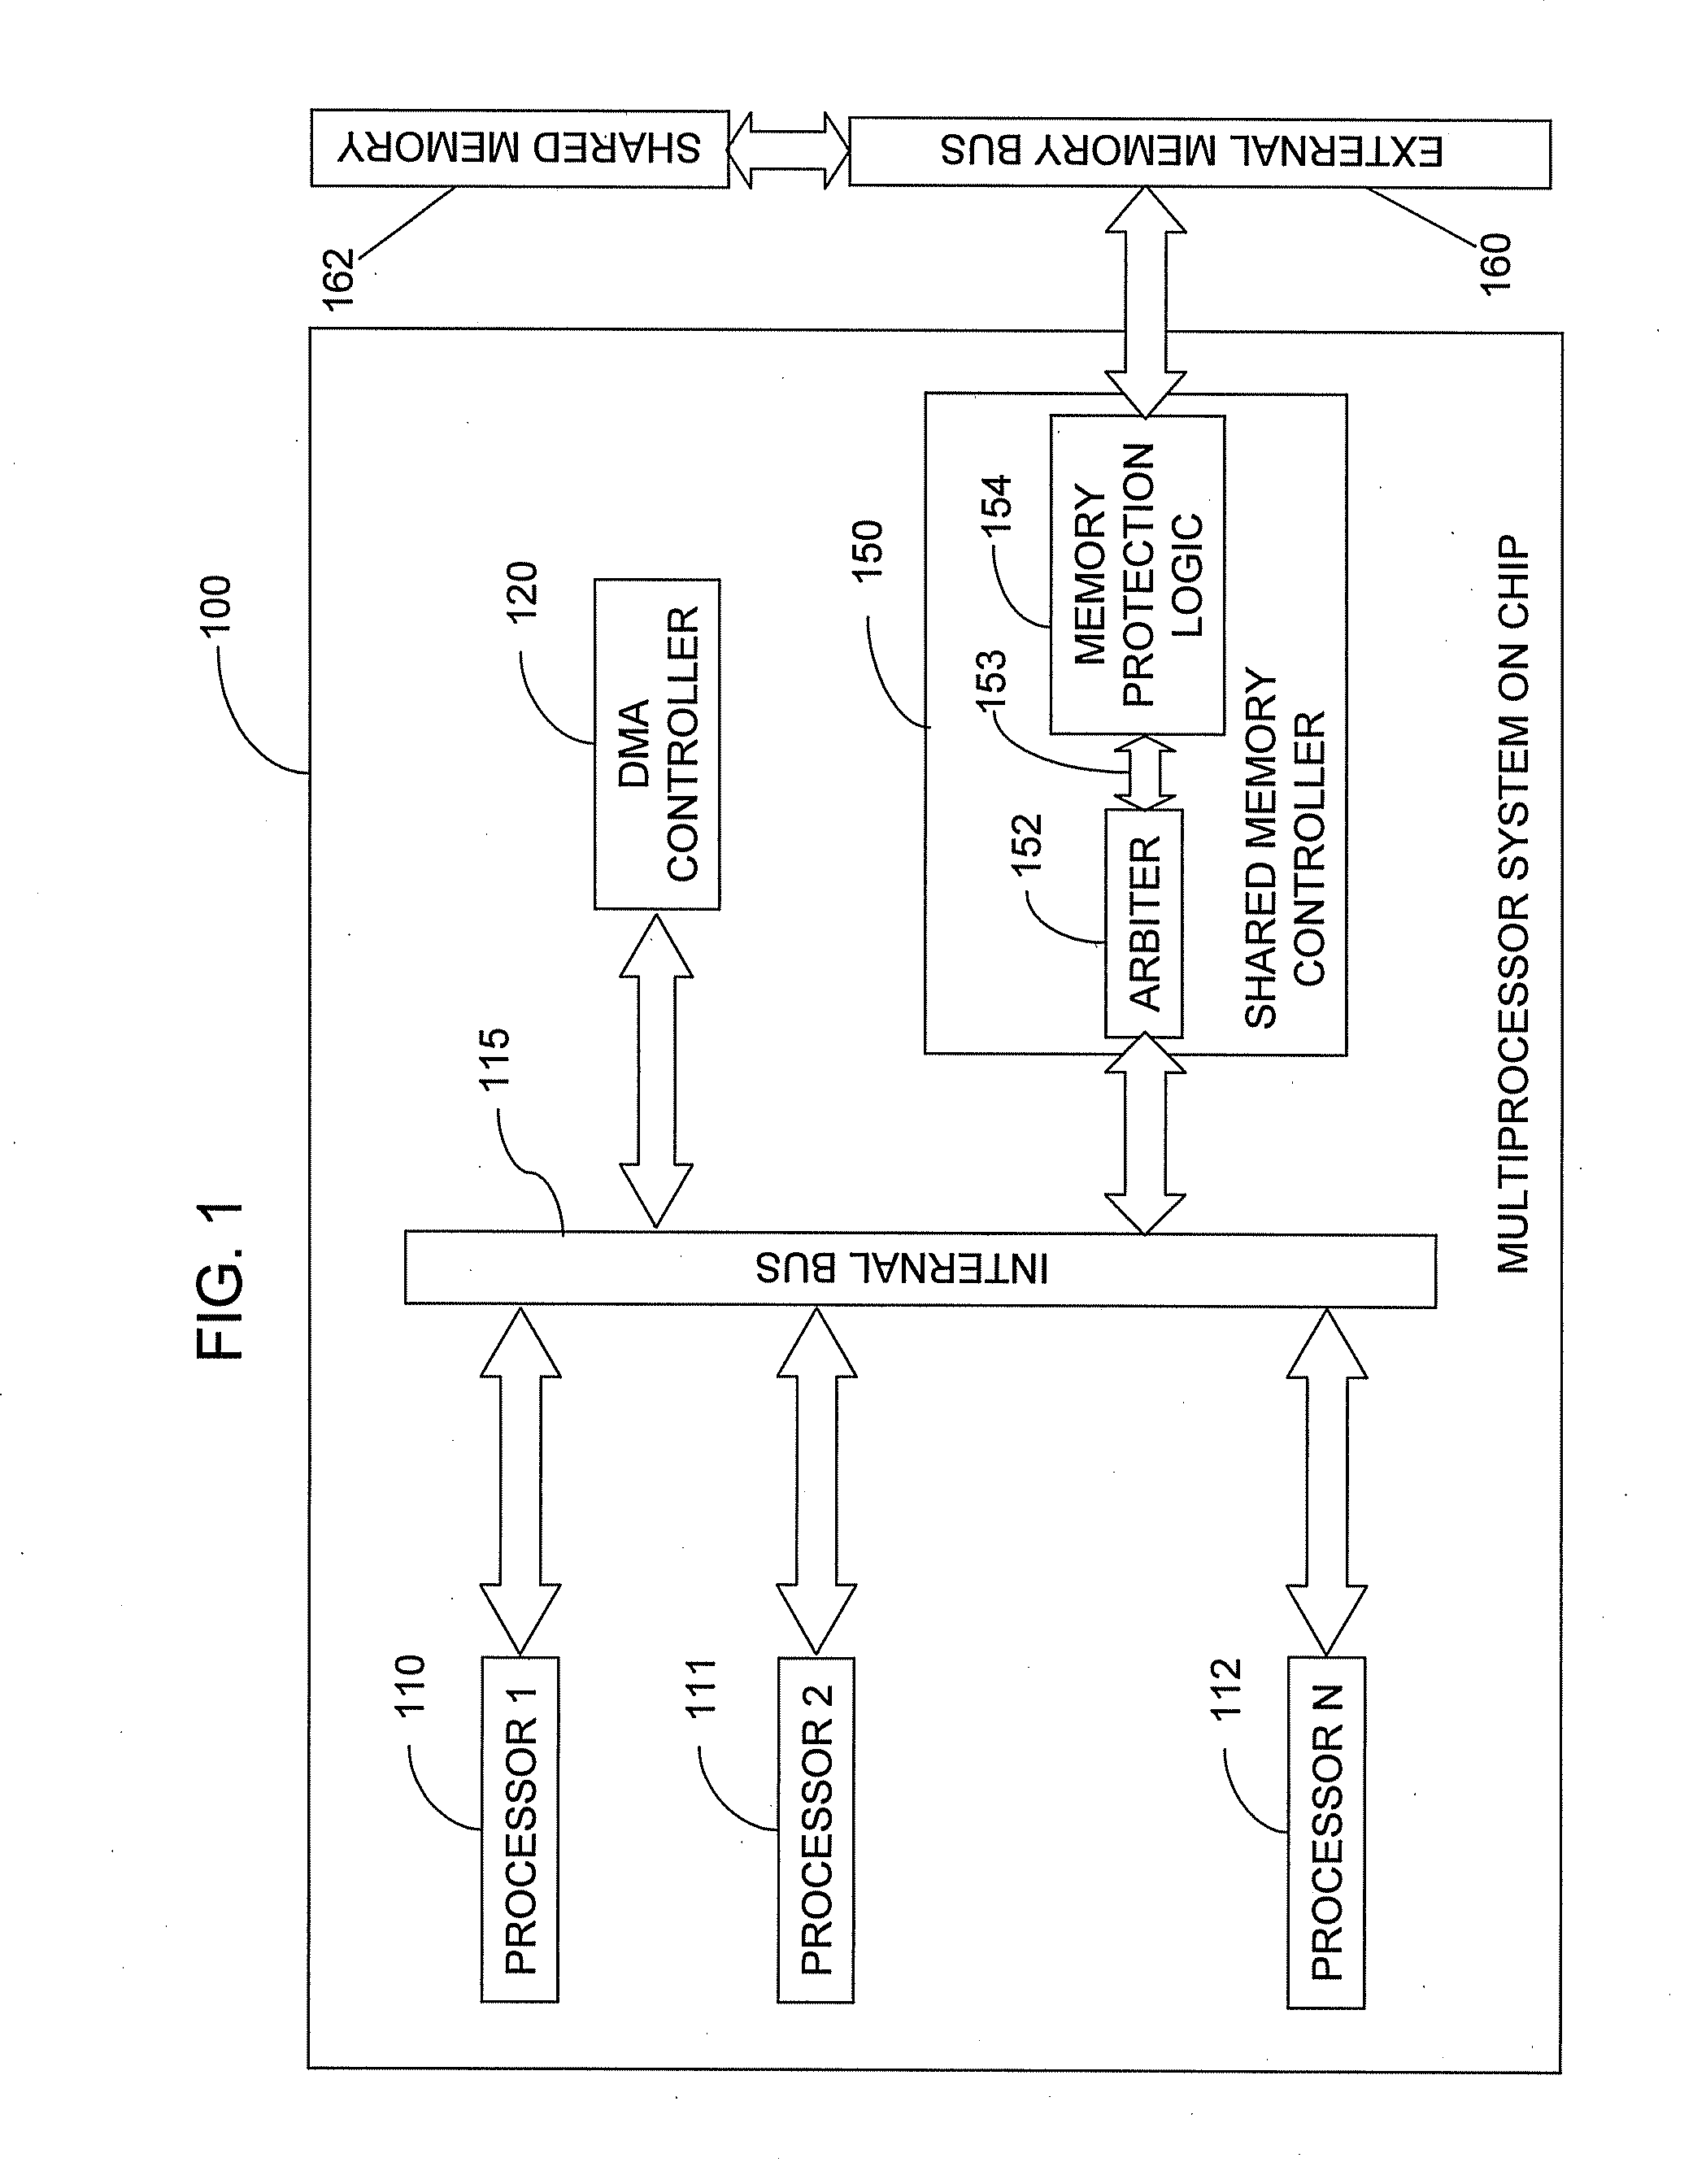 Memory protection system and method